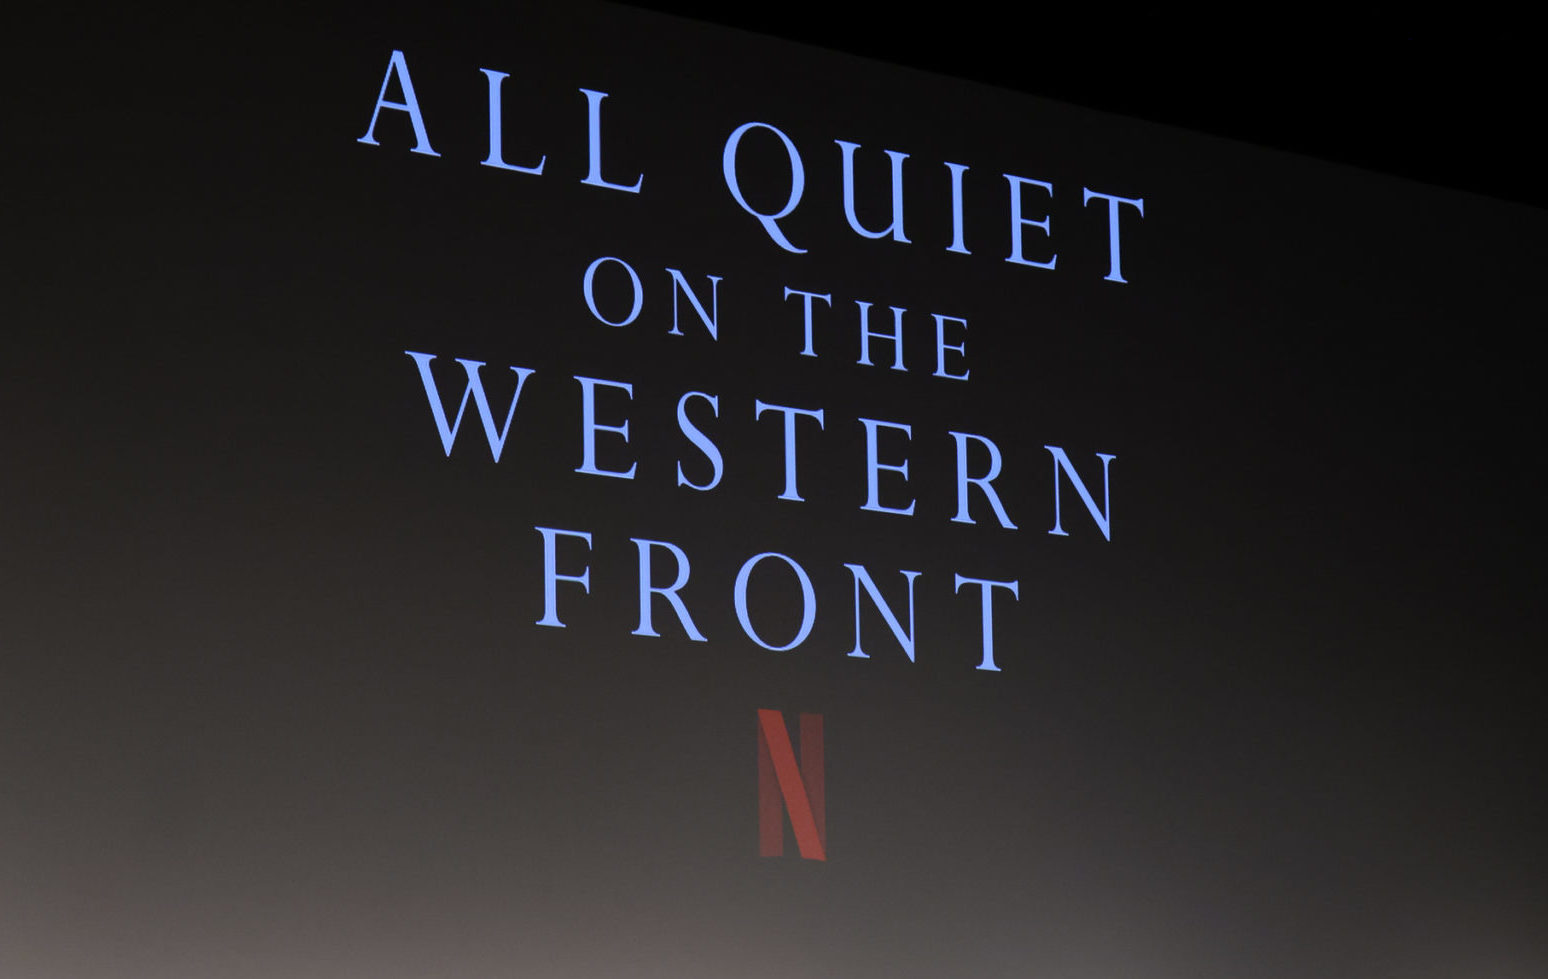 Benedict Cumberbatch Hosts a Special Screening of 'All Quiet on the Western Front'